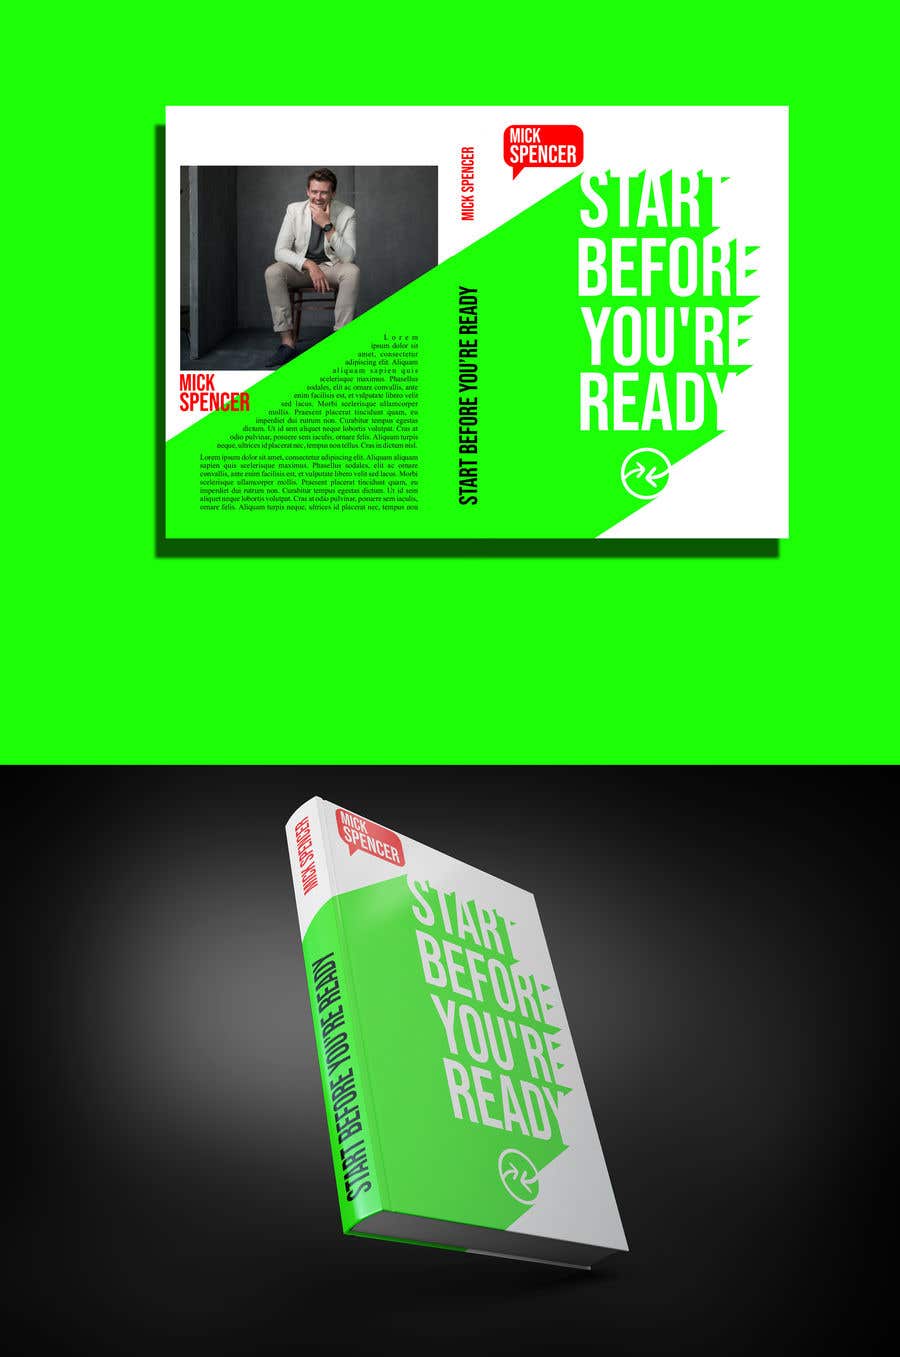 Konkurrenceindlæg #41 for                                                 BOOK DESIGN CONTEST-START BEFORE YOU'RE READY
                                            